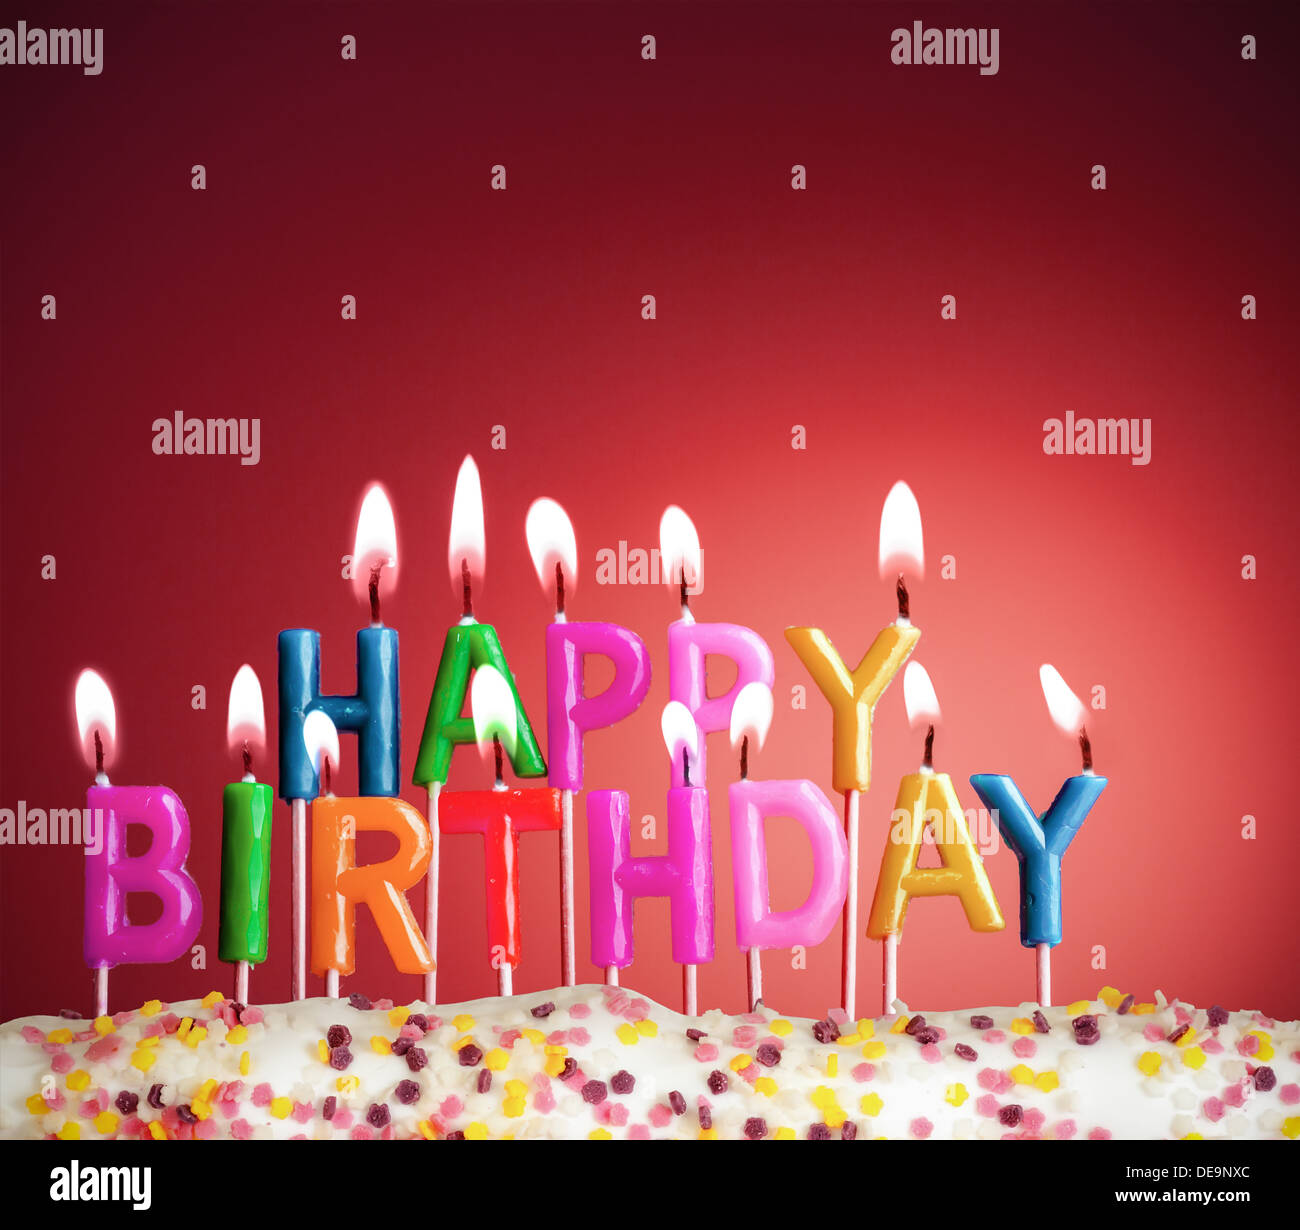 Happy birthday lit candles on red background Stock Photo